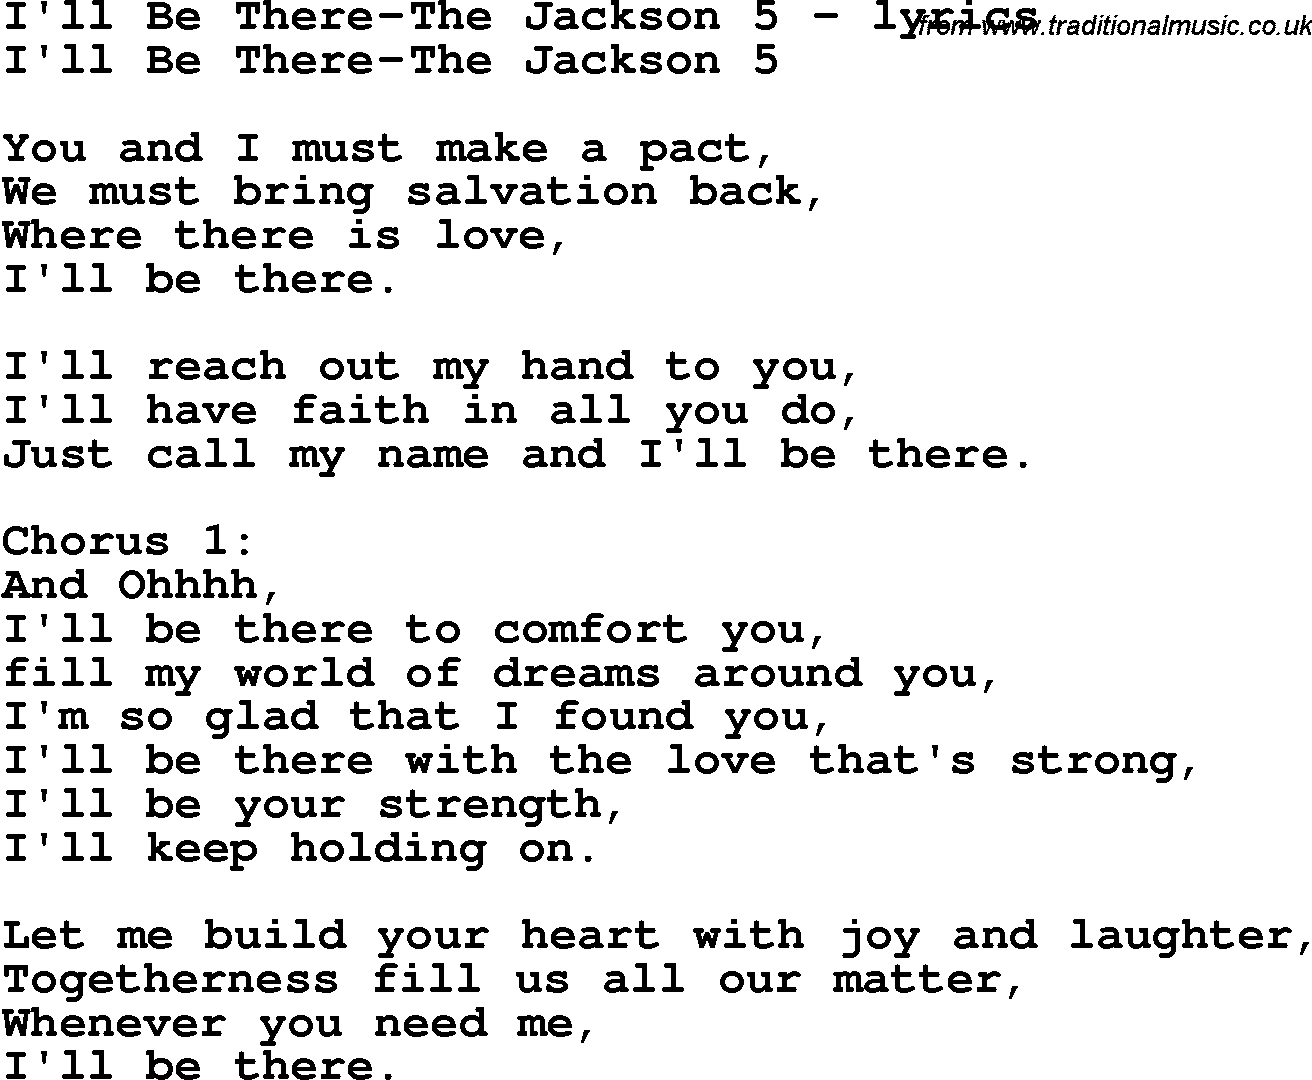 Love Song Lyrics for: I'll Be There-The Jackson 5